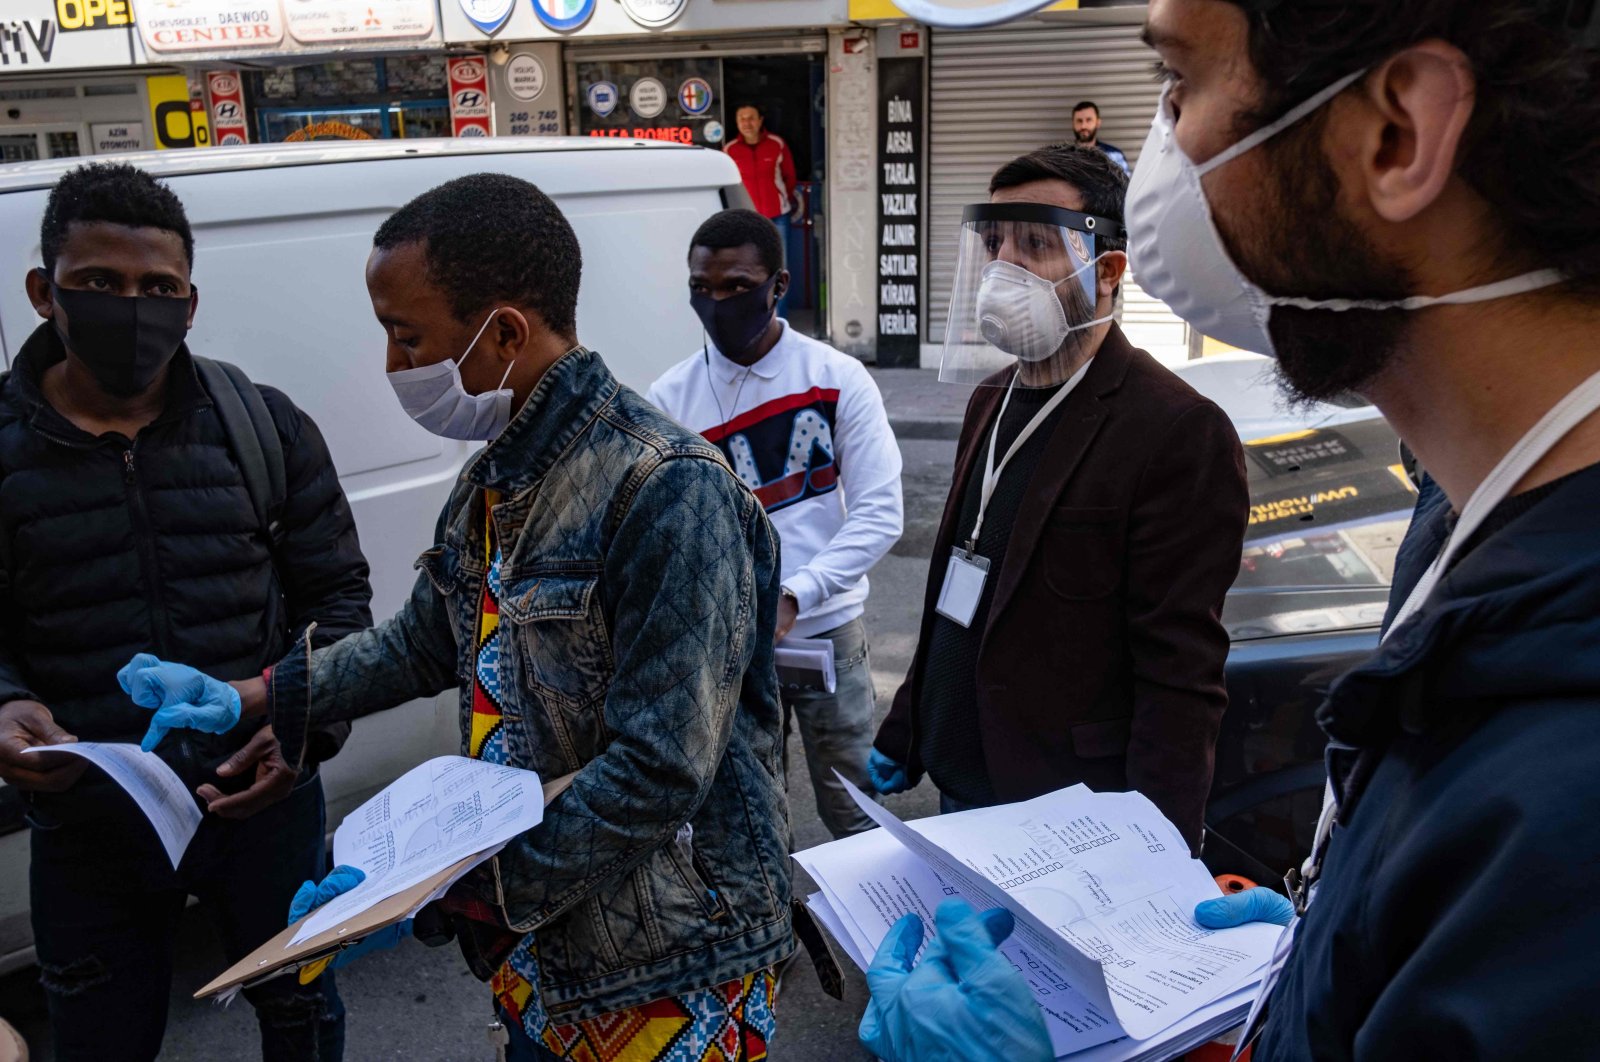 Members of a solidarity network hand out disinfectant, gloves and face masks as well as food cards to African migrants in Istanbul, April 17, 2020. (AFP Photo)